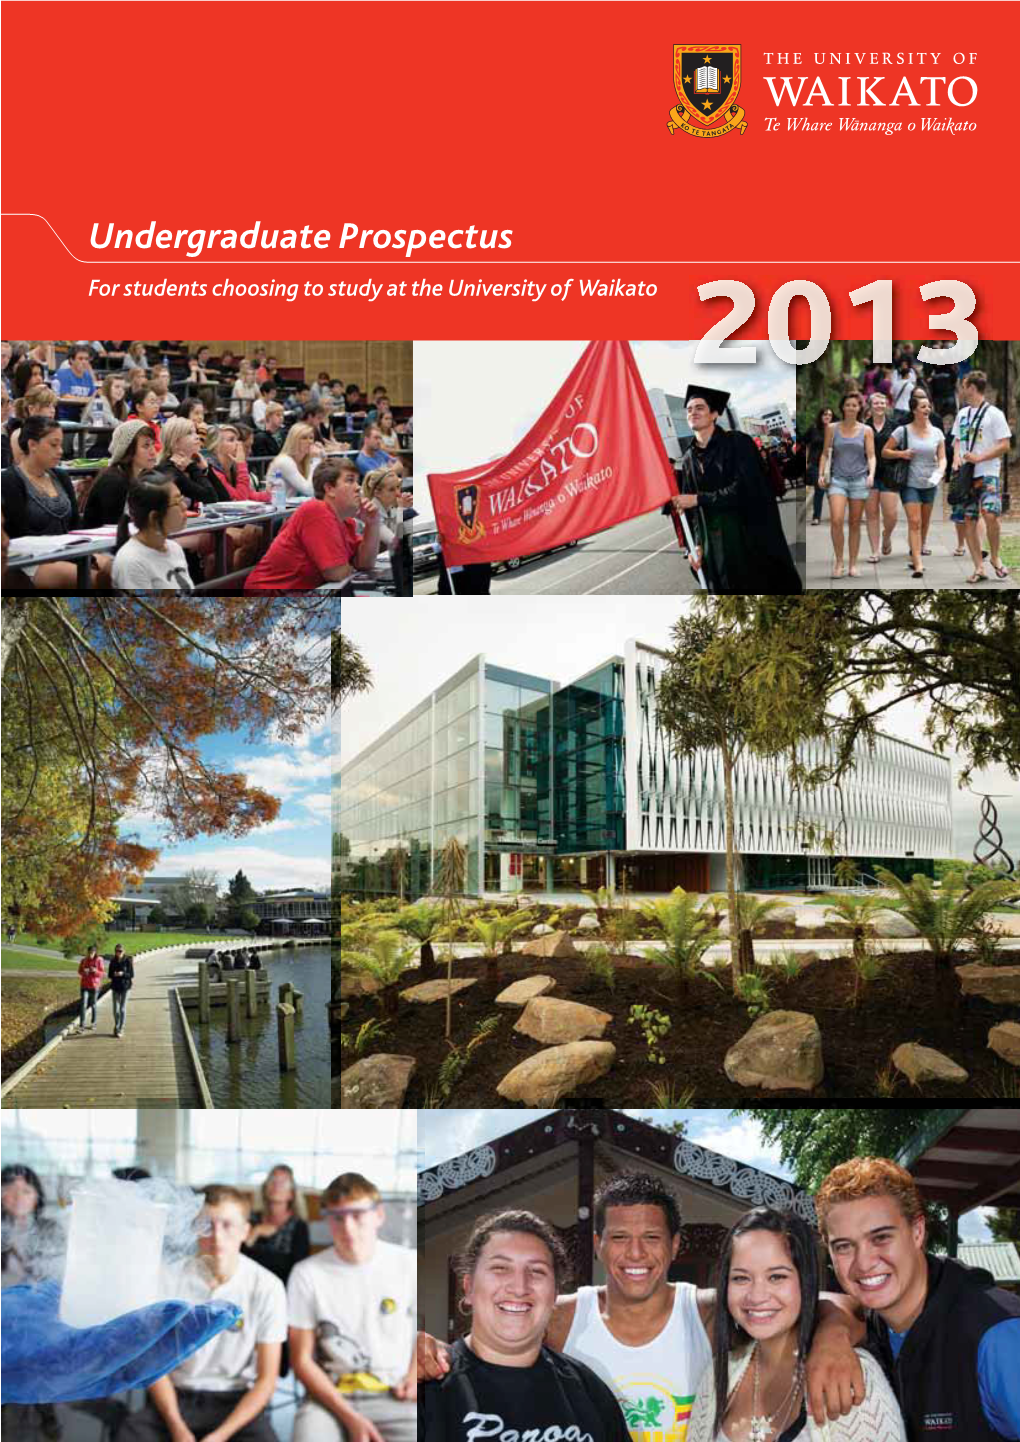 Undergraduate Prospectus for Students Choosing to Study at the University of Waikato Contents